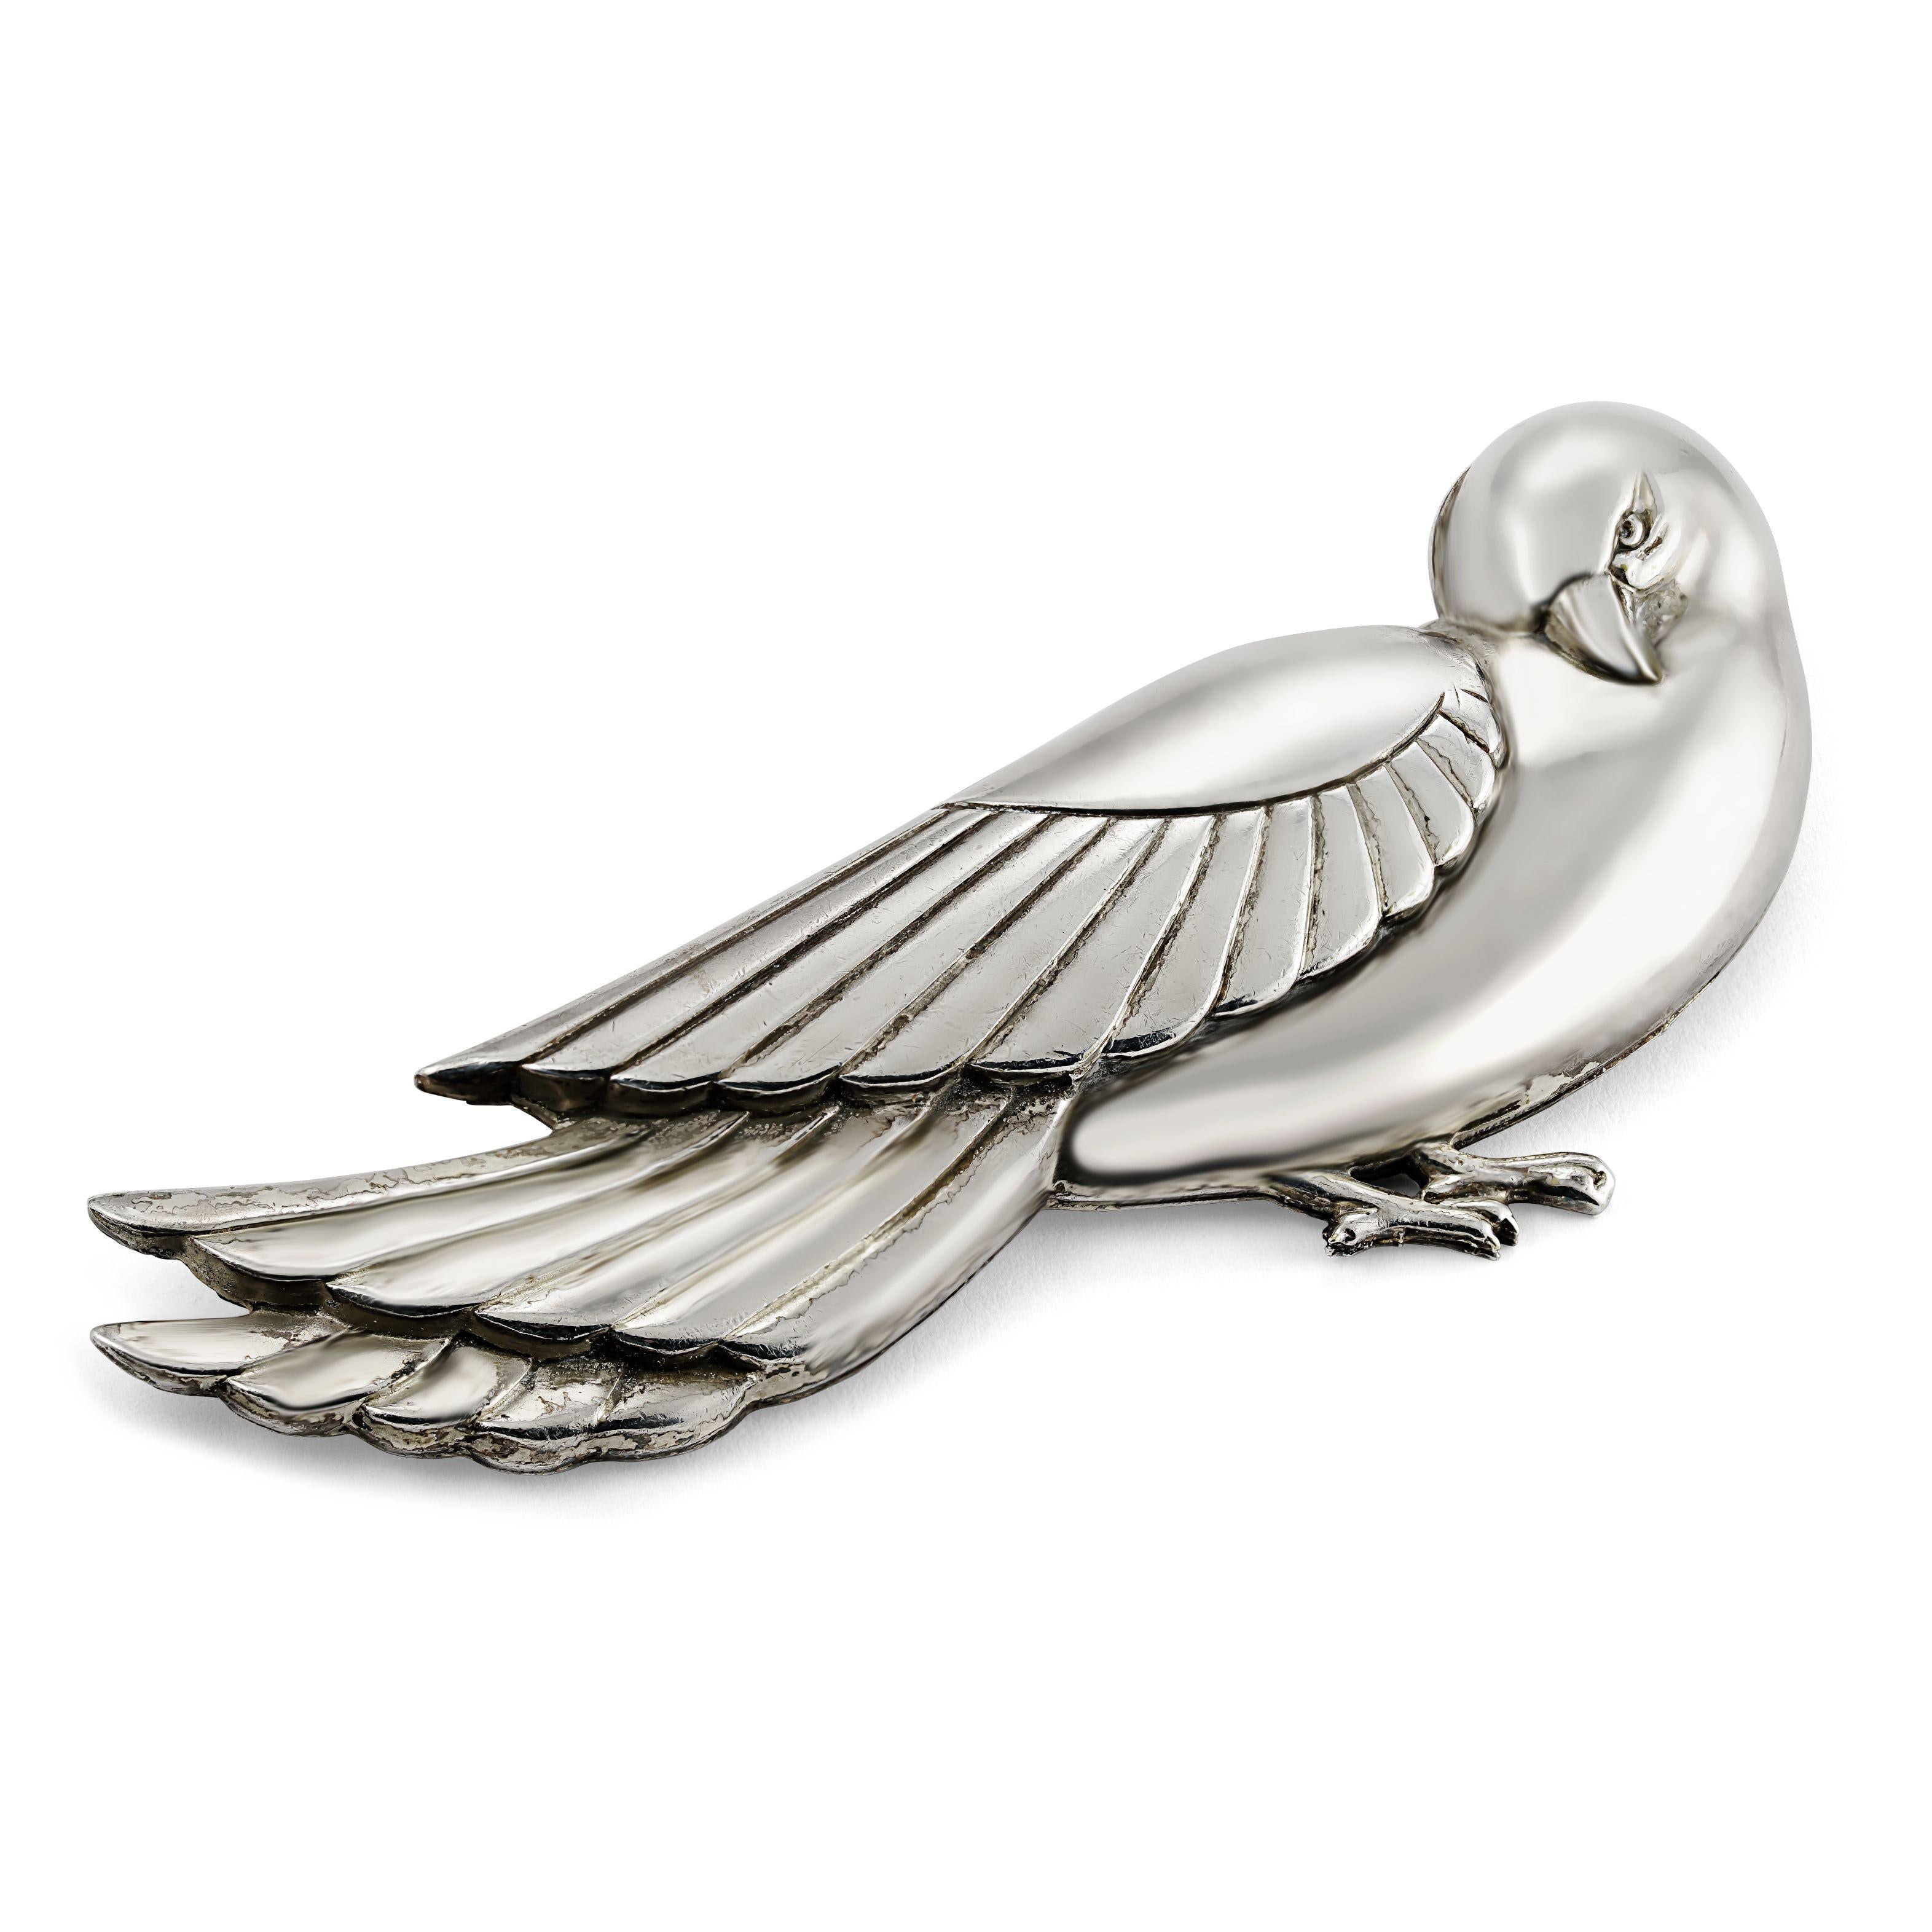 Simply Fabulous! Dynamic Art Deco Sterling Silver Dove Bird Pin, measuring an impressive 3.5” long. Circa 1930s. More Beautiful in Real Time! A rare blend of Elegance and Edge! For that Special Someone…Including You!  
